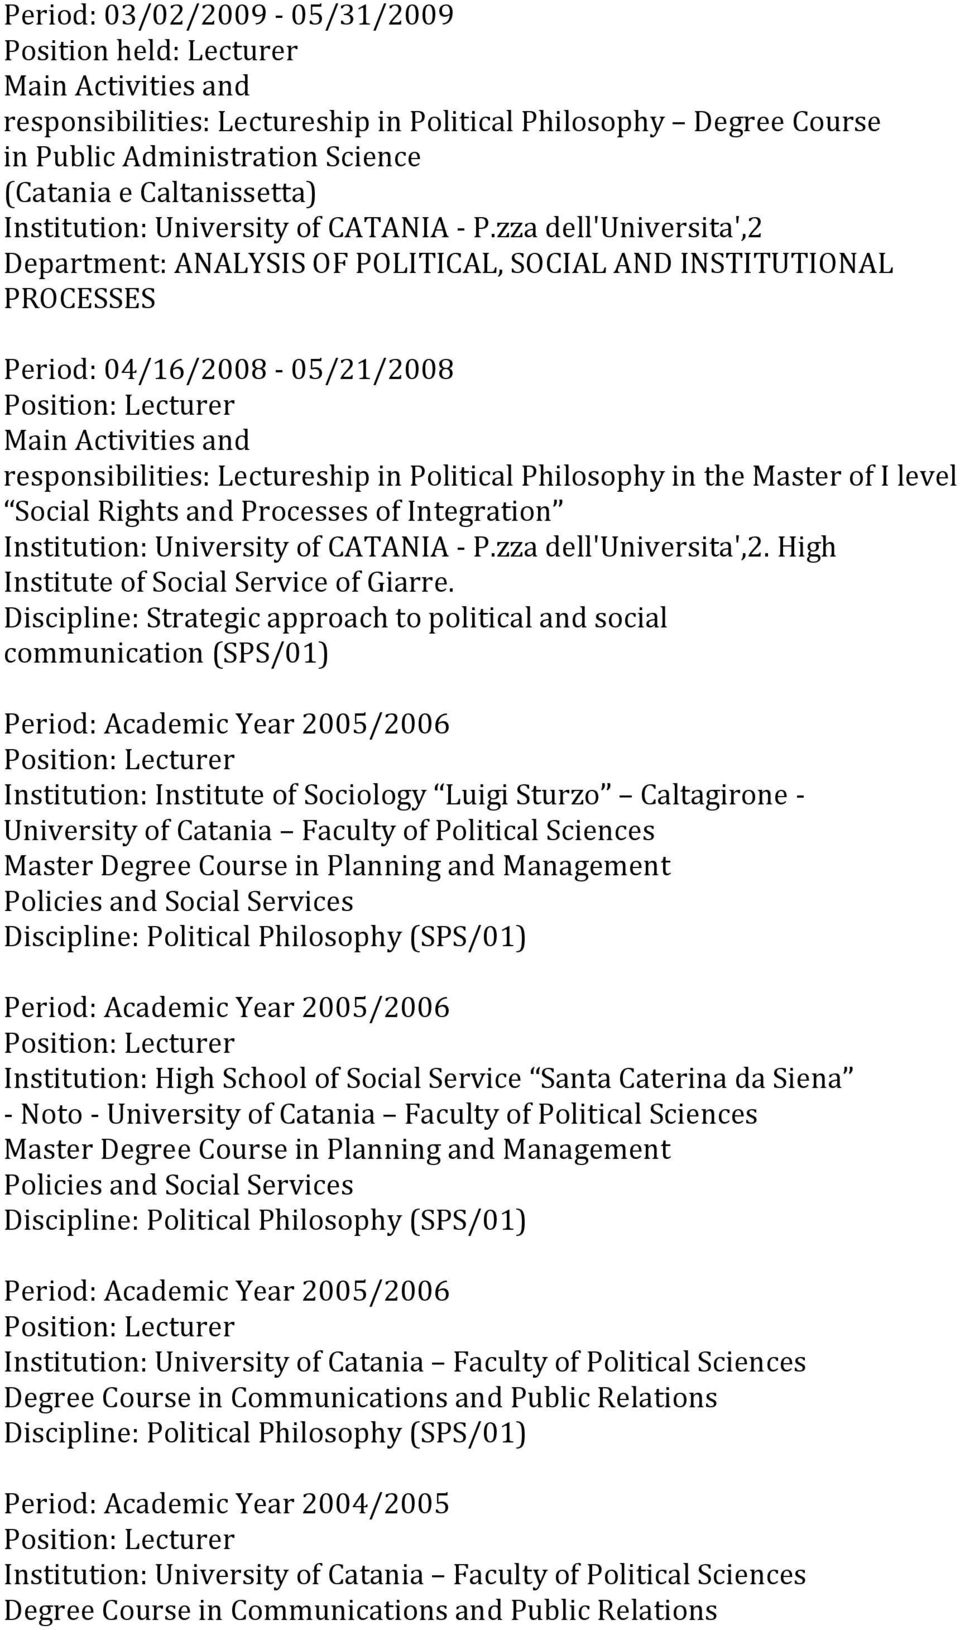 zza dell'universita',2 Department: ANALYSIS OF POLITICAL, SOCIAL AND INSTITUTIONAL PROCESSES Period: 04/16/2008-05/21/2008 Main Activities and responsibilities: Lectureship in Political Philosophy in